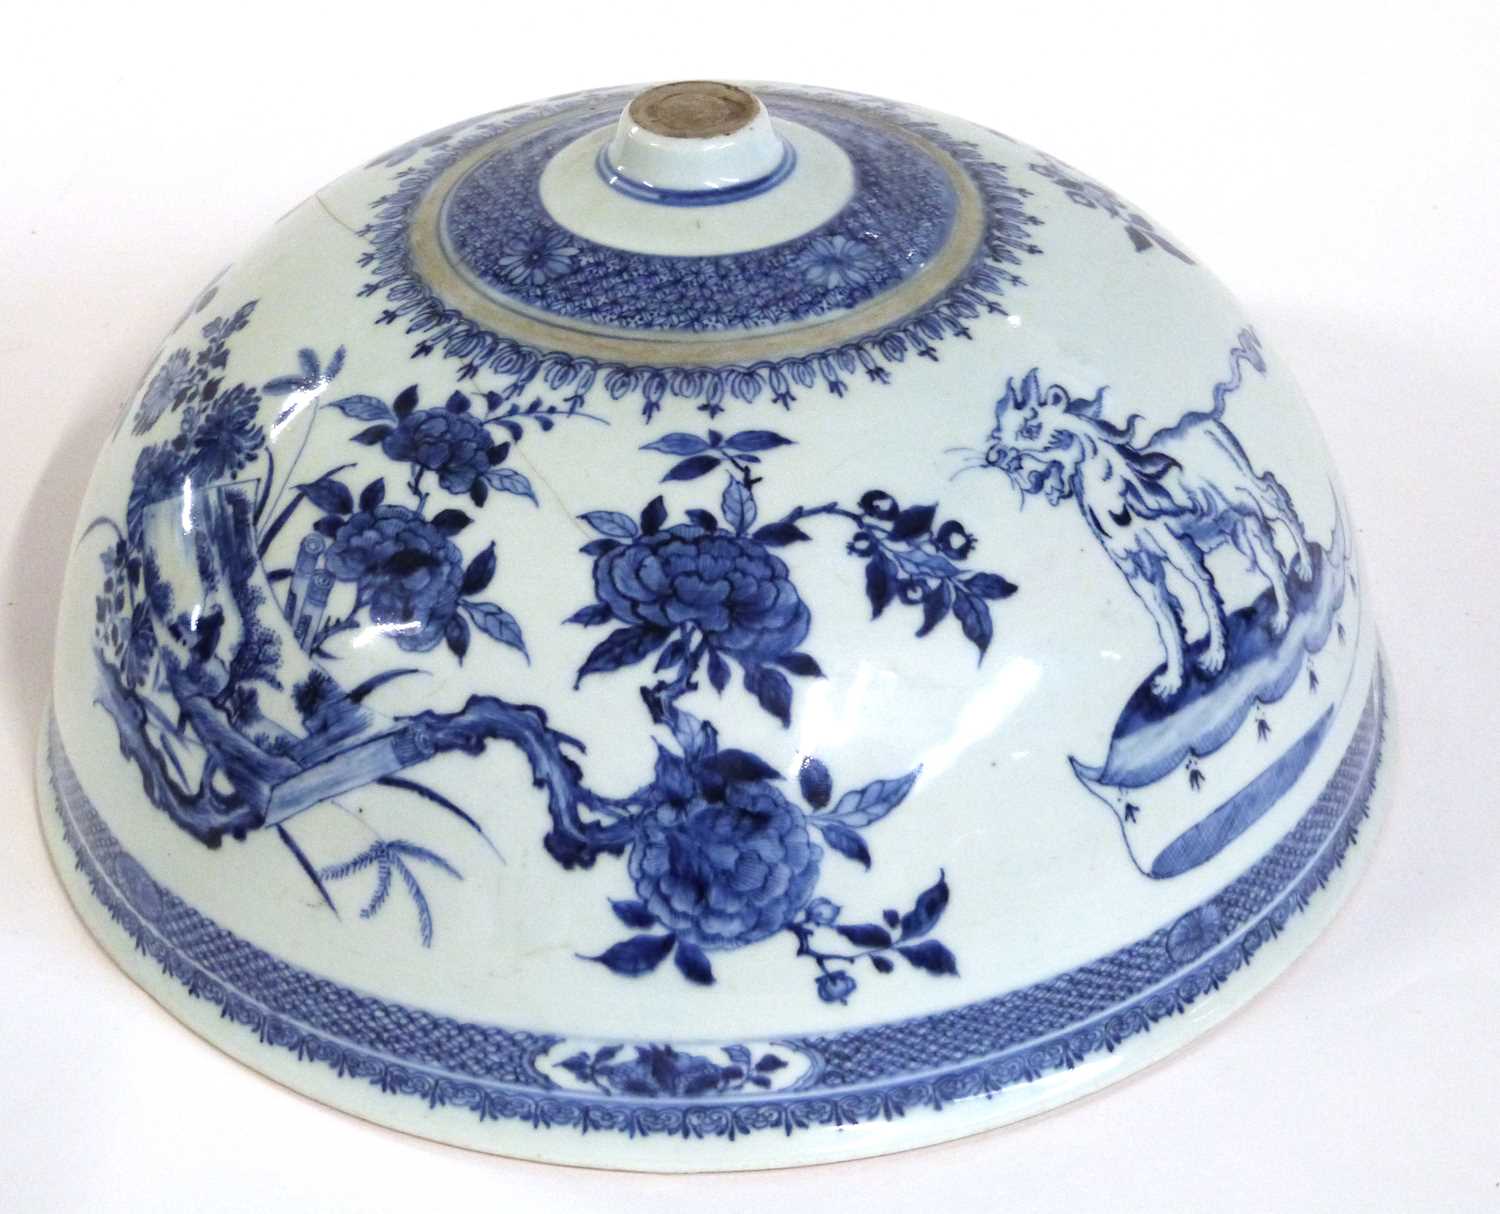 An interesting 18th Century Chinese porcelain export bowl or cover decorated with a floral design - Image 6 of 8